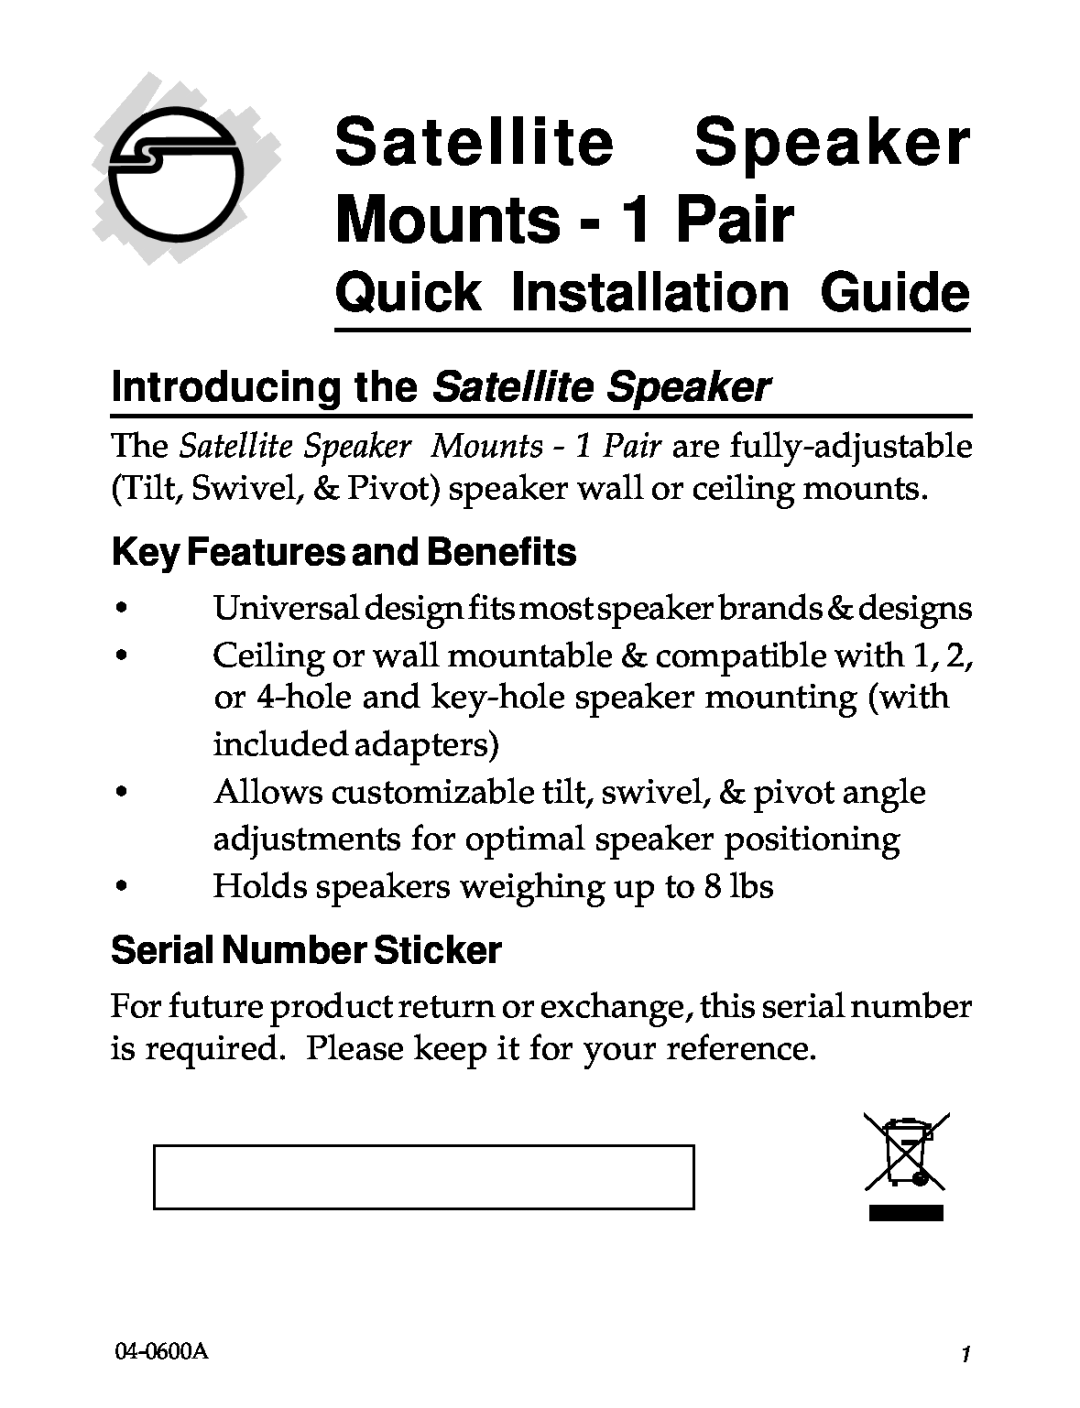 SIIG 04-0600A manual Key Features and Benefits, Serial Number Sticker, Satellite Speaker Mounts - 1 Pair 